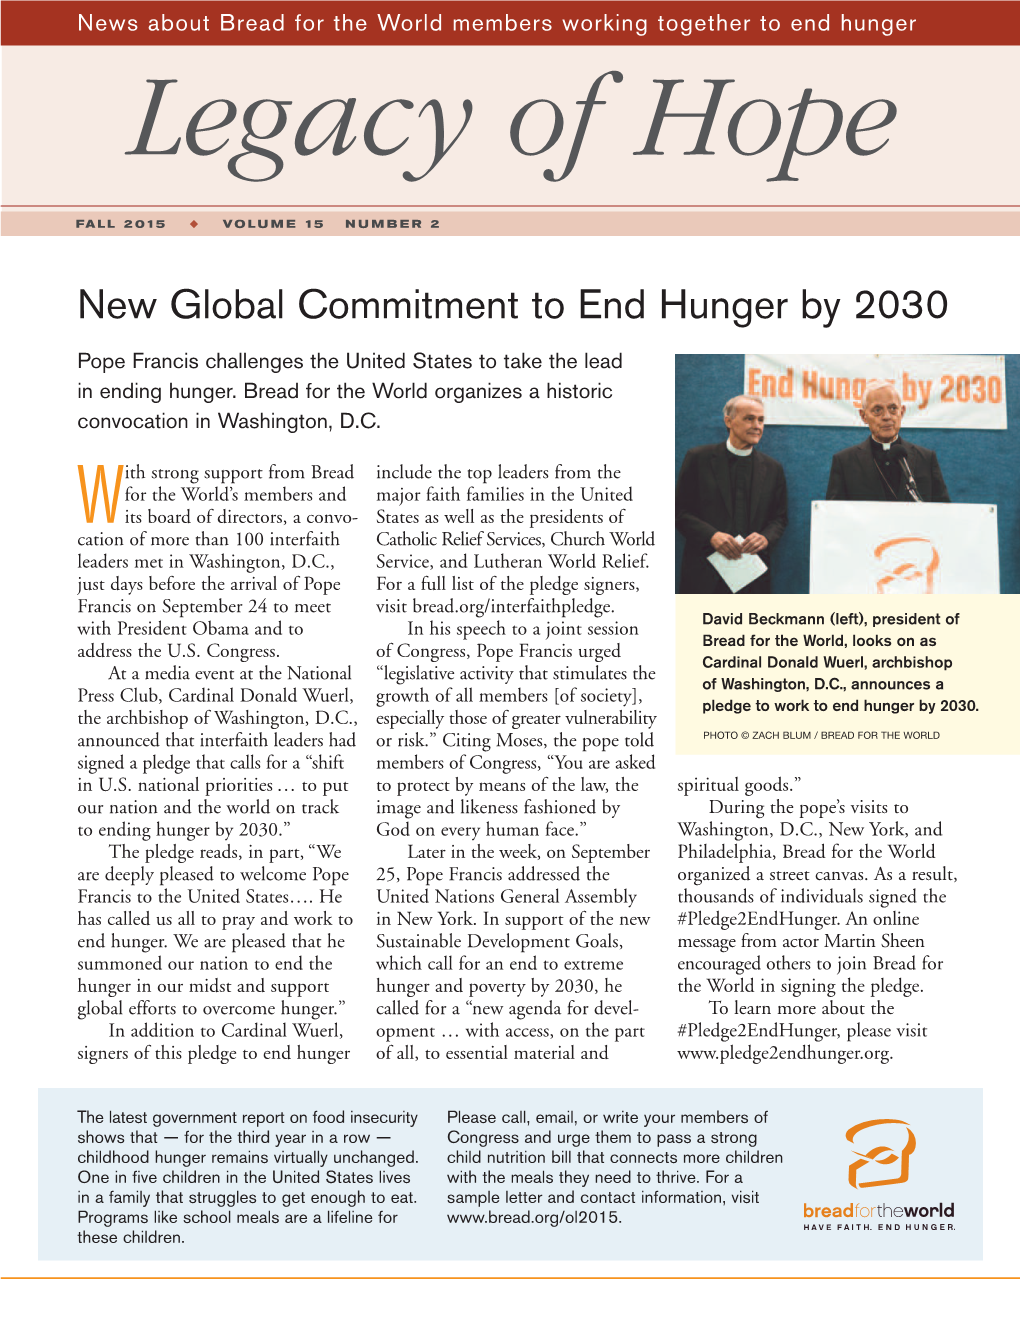 New Global Commitment to End Hunger by 2030